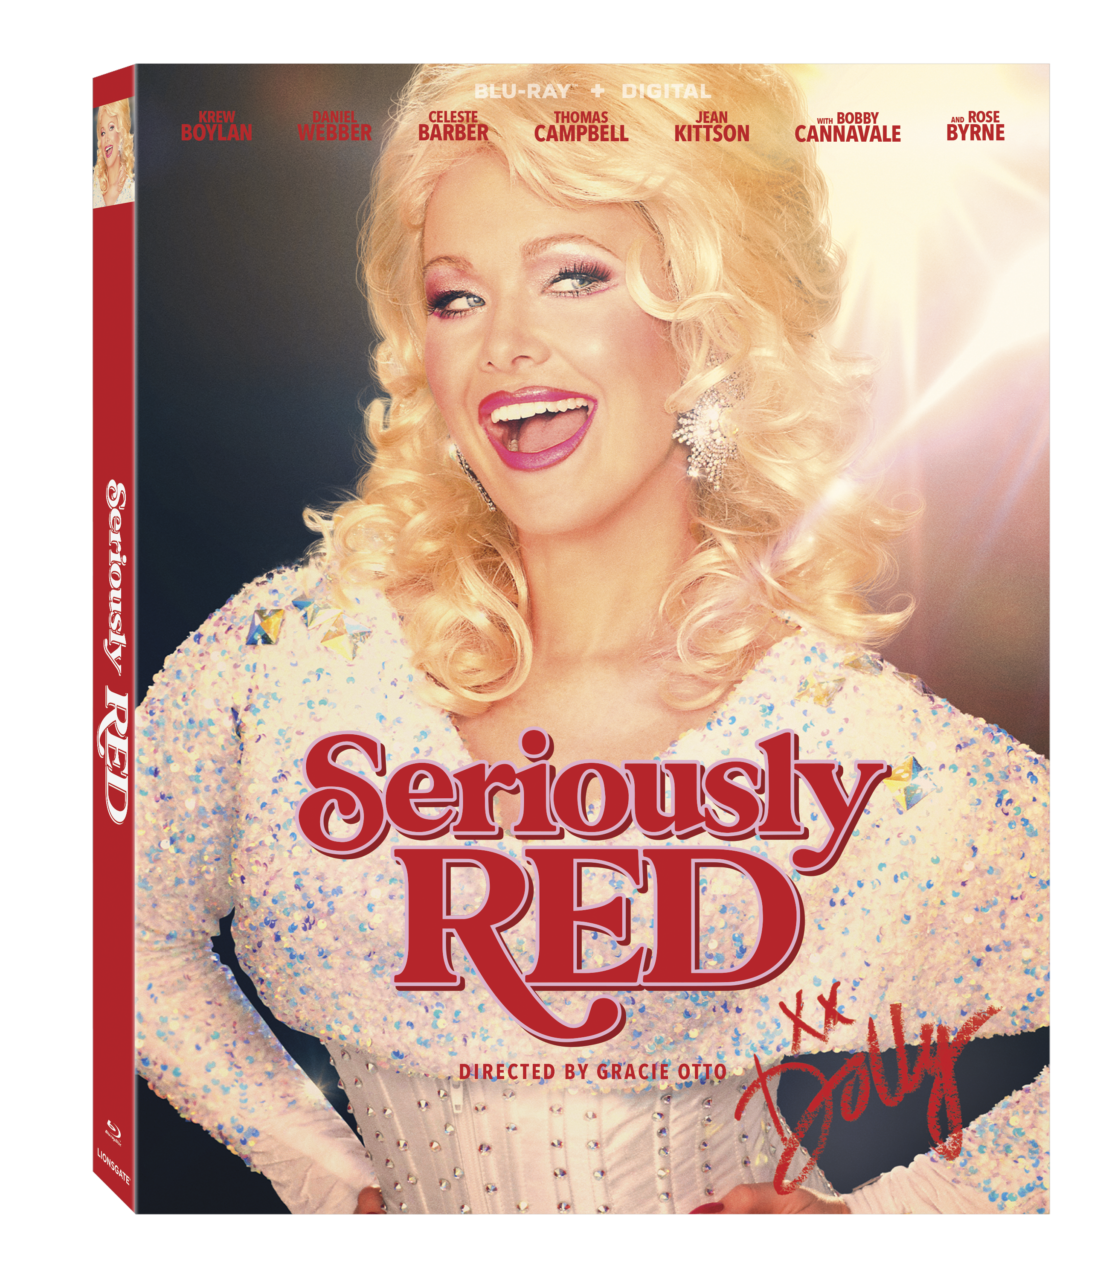 Seriously Red Blu-Ray Combo Pack cover (Lionsgate)